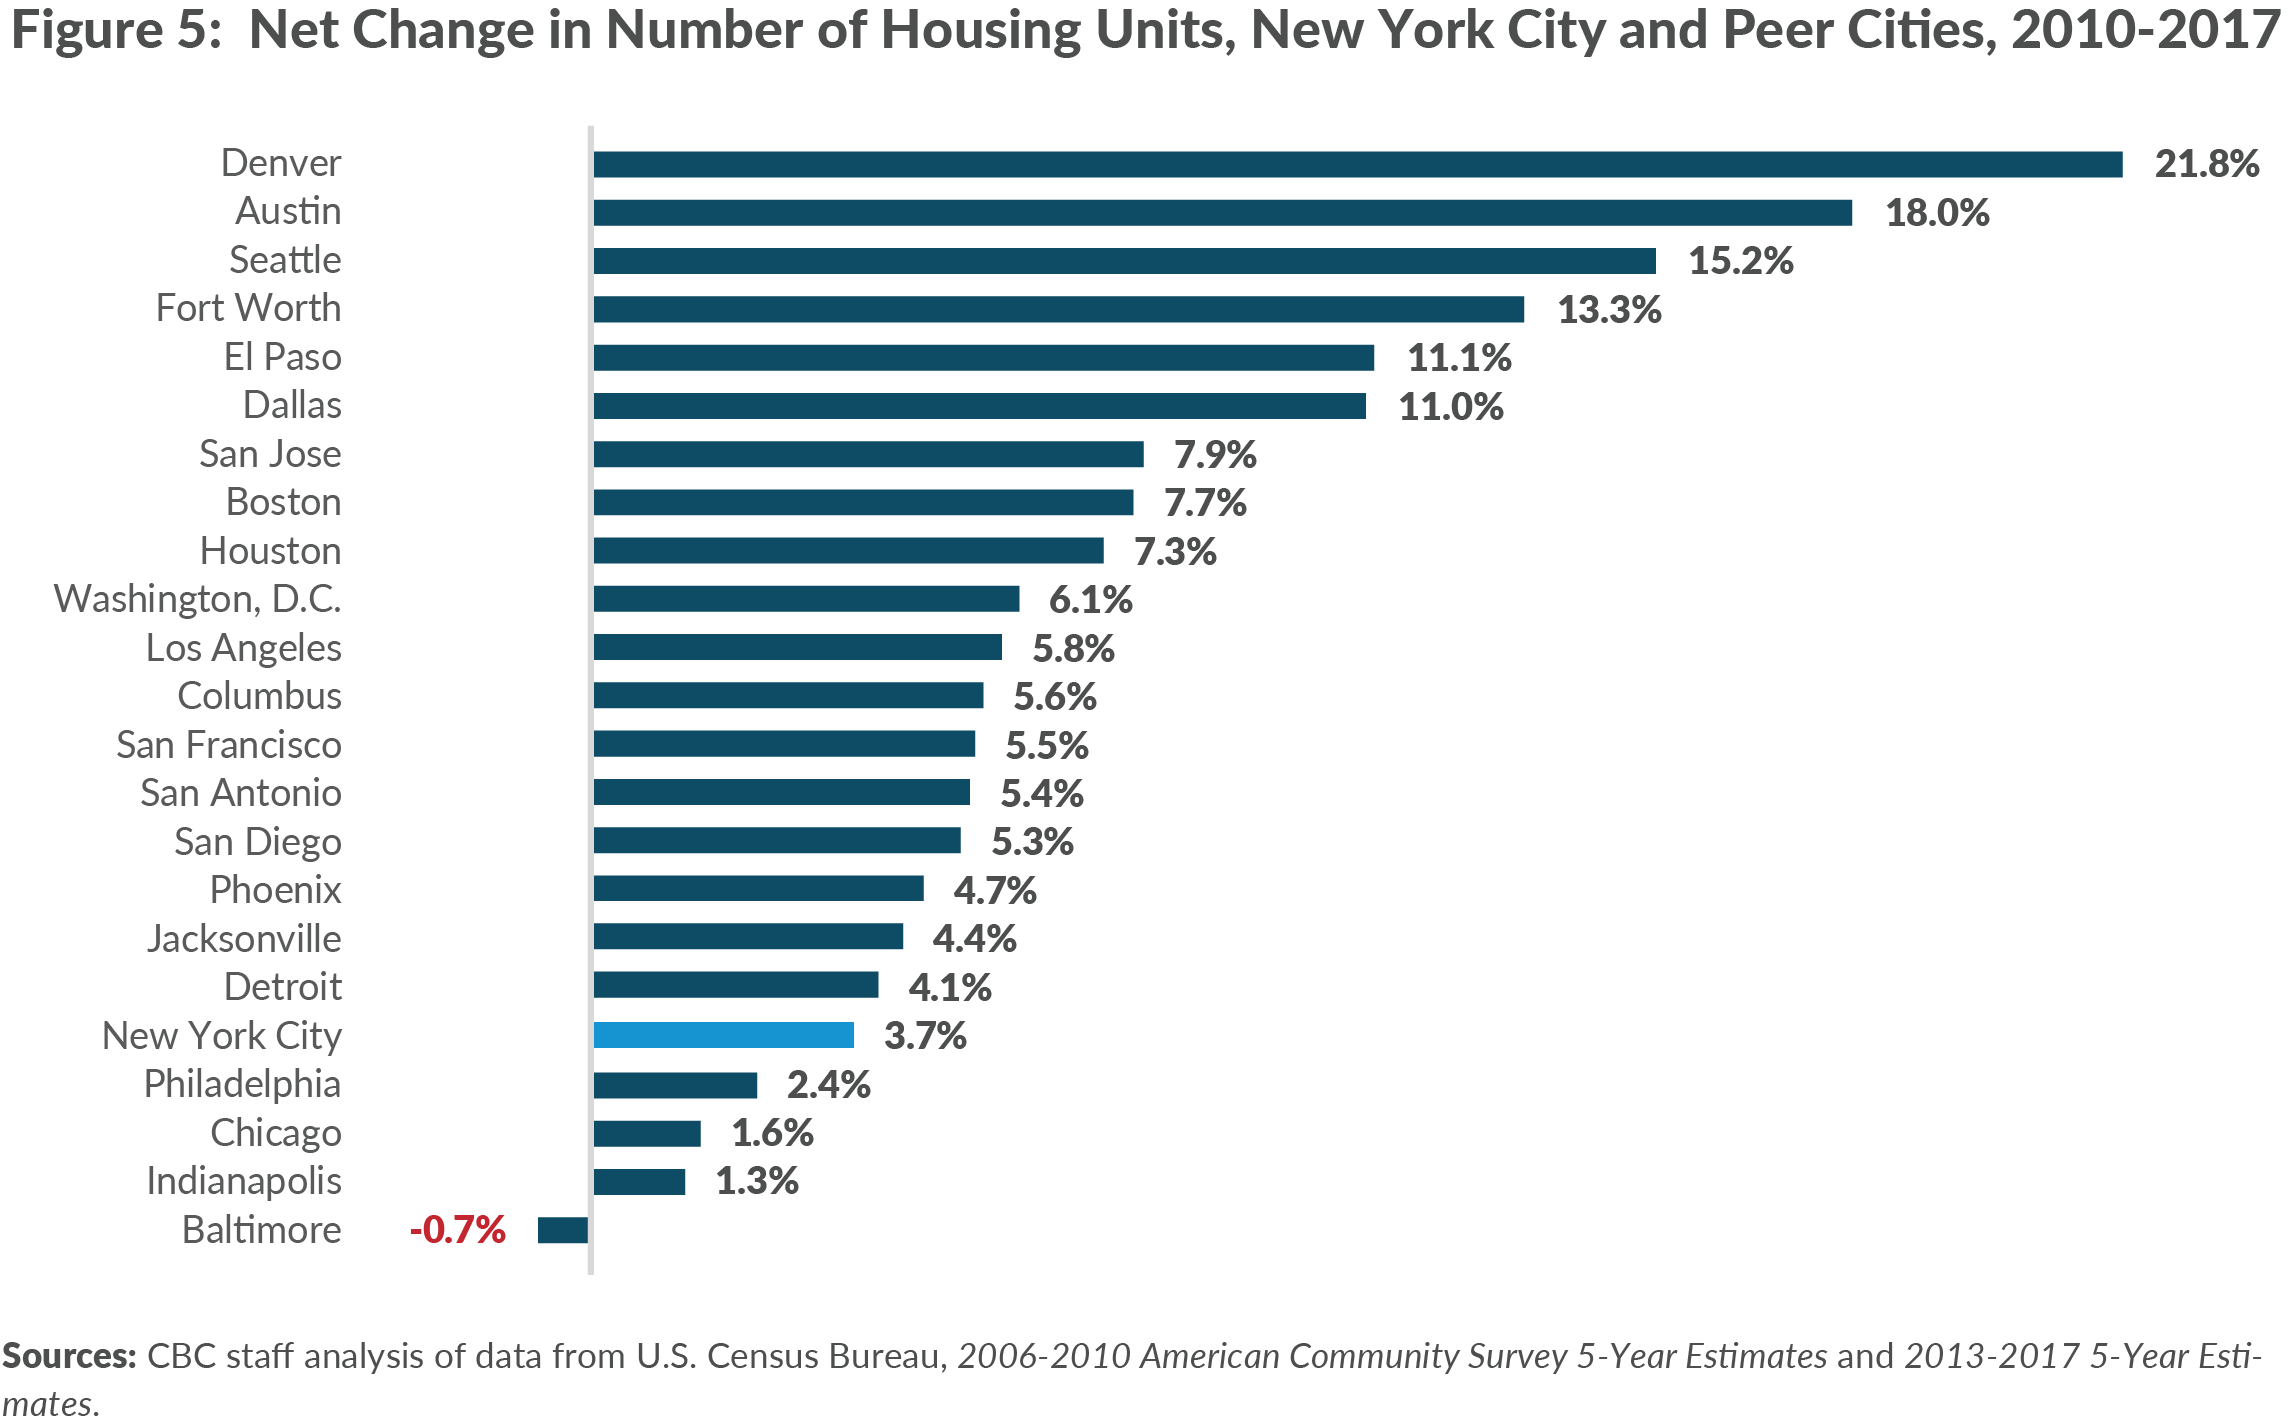 Figure 5. Net Change in Number of Housing Units, New York City and Peer Cities, 2010-2017